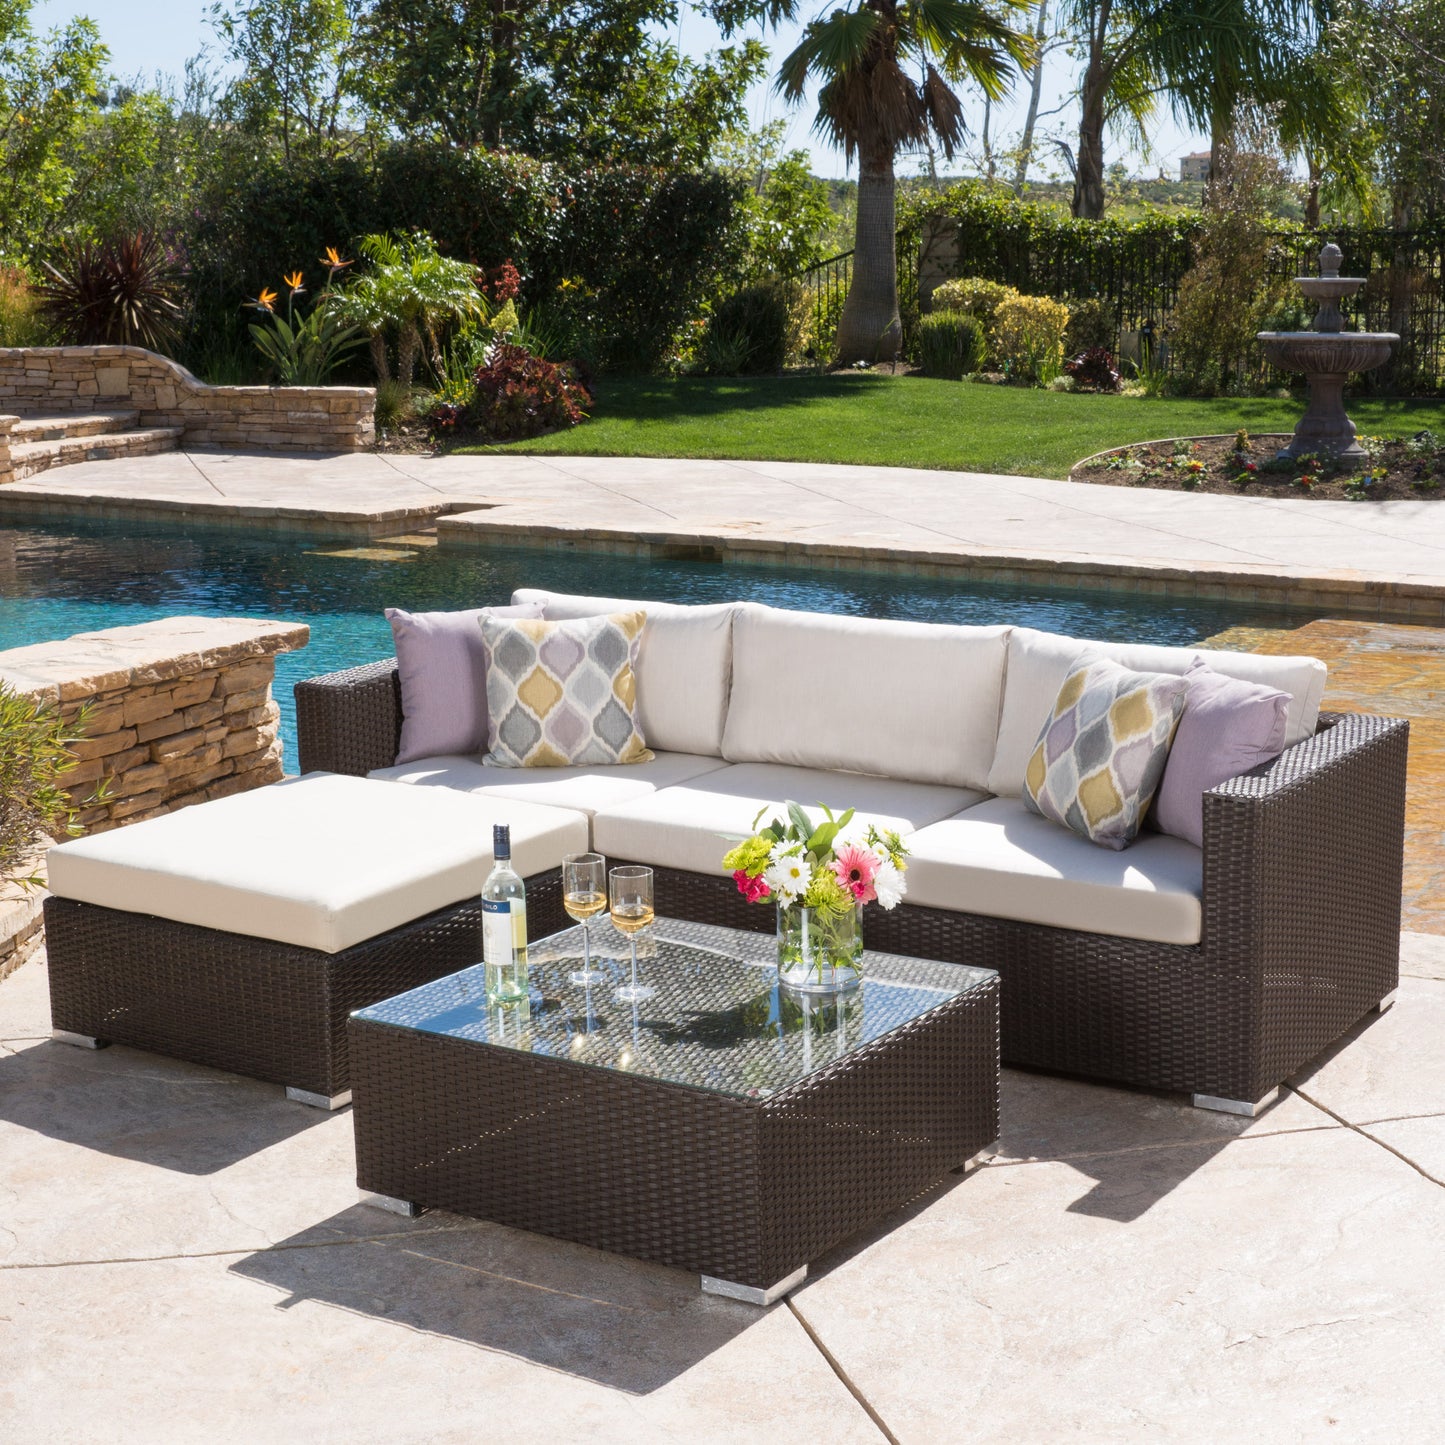 Francisco 5pc Outdoor Brown Wicker/Aluminum Seating Sectional Set w/ Cushions